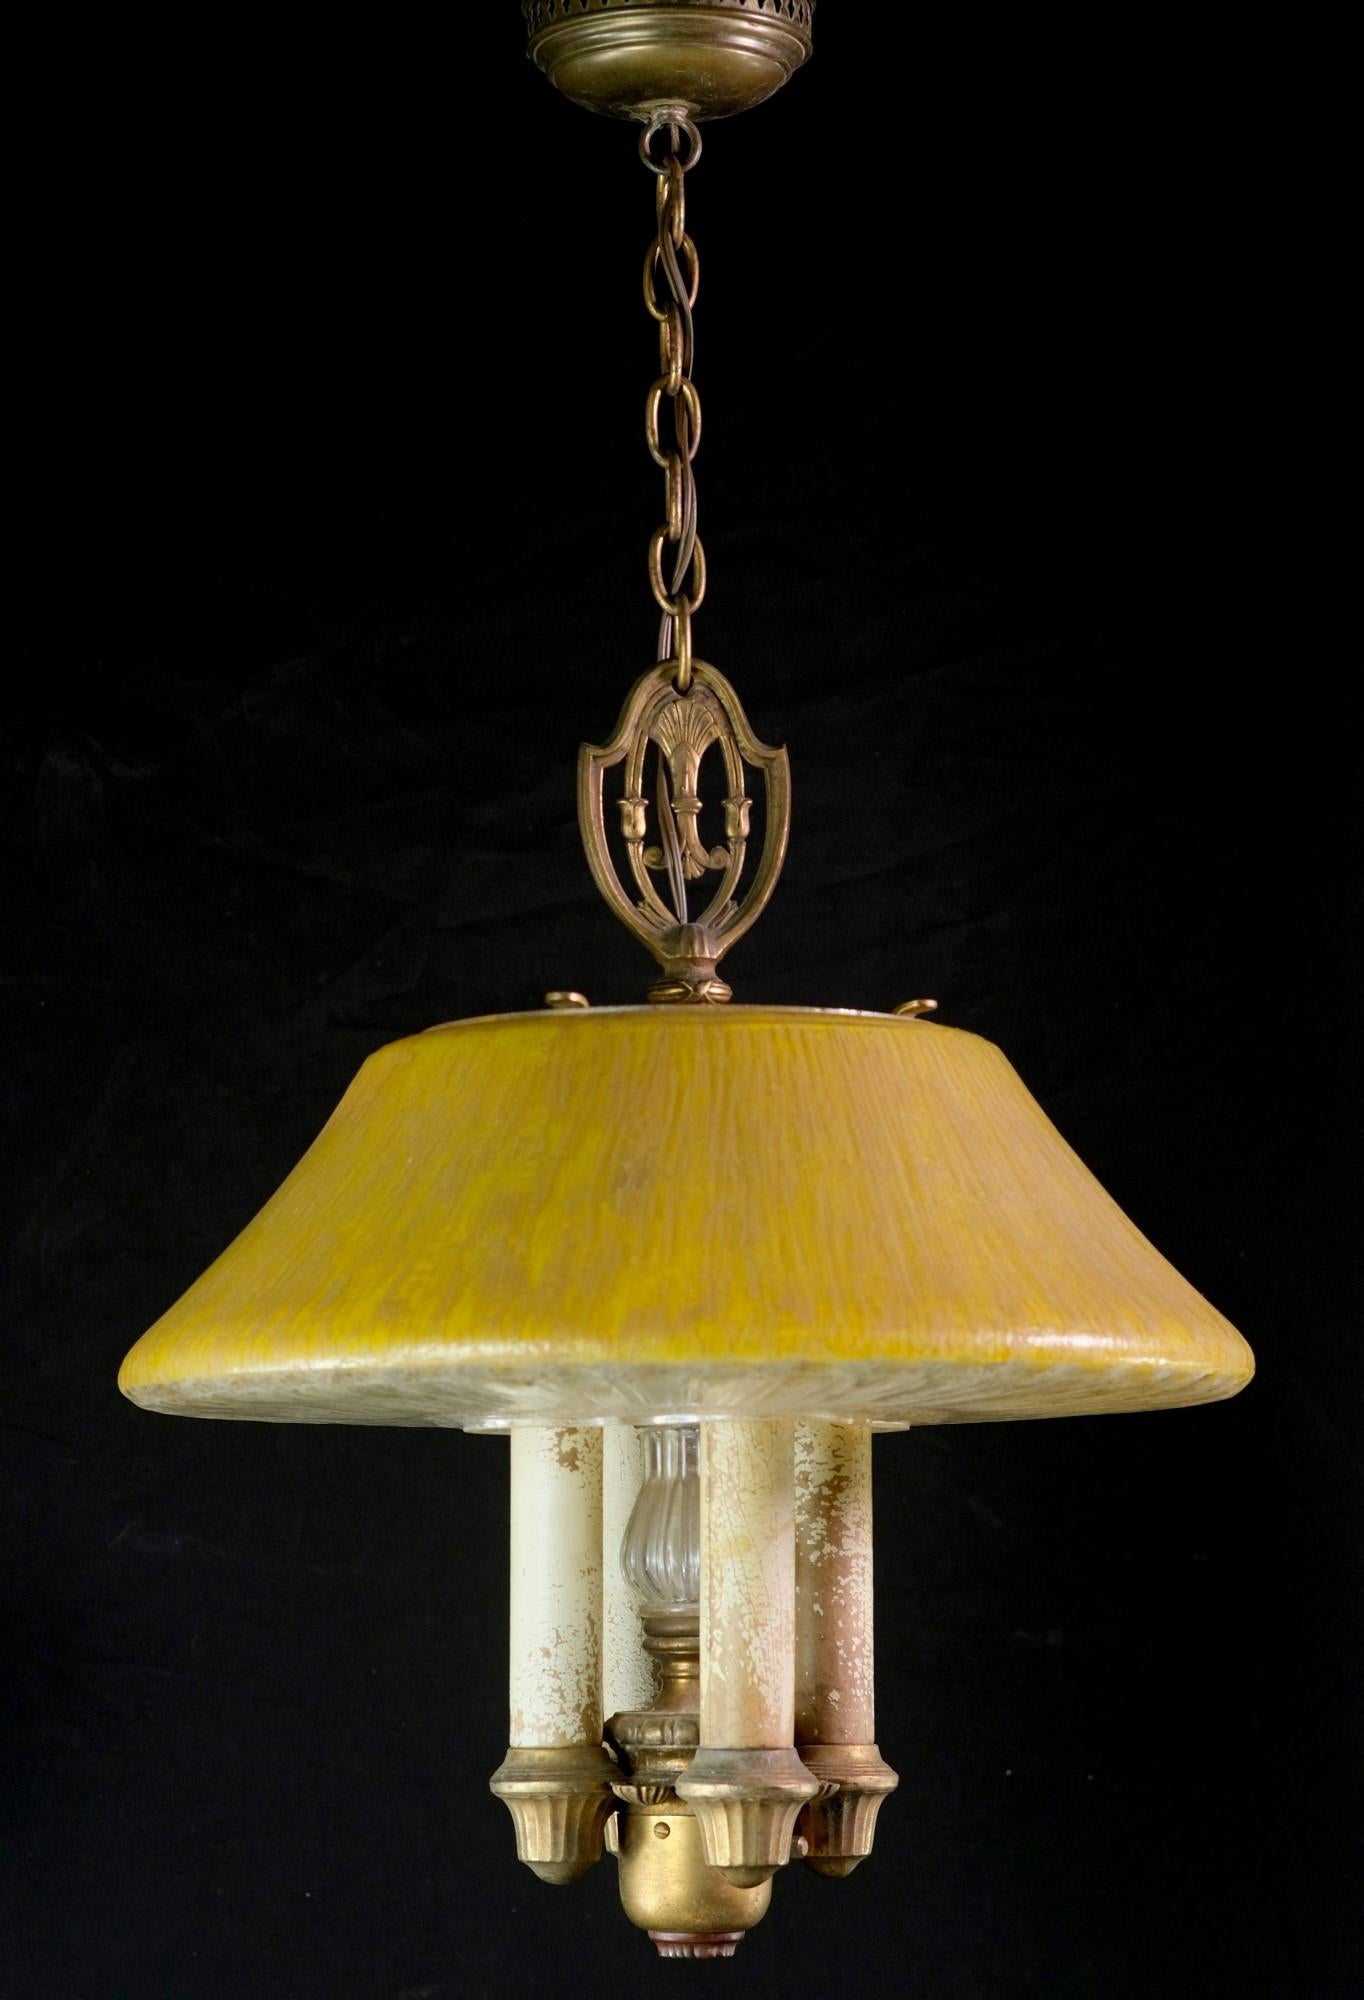 A cast yellow glass mushroom shaped shade adorns this four candlestick pendant light. Features bronze plated steel hardware. Made by Lightolier. Accepts four E26 light bulbs. This can be seen at our 400 Gilligan St location in Scranton, PA.